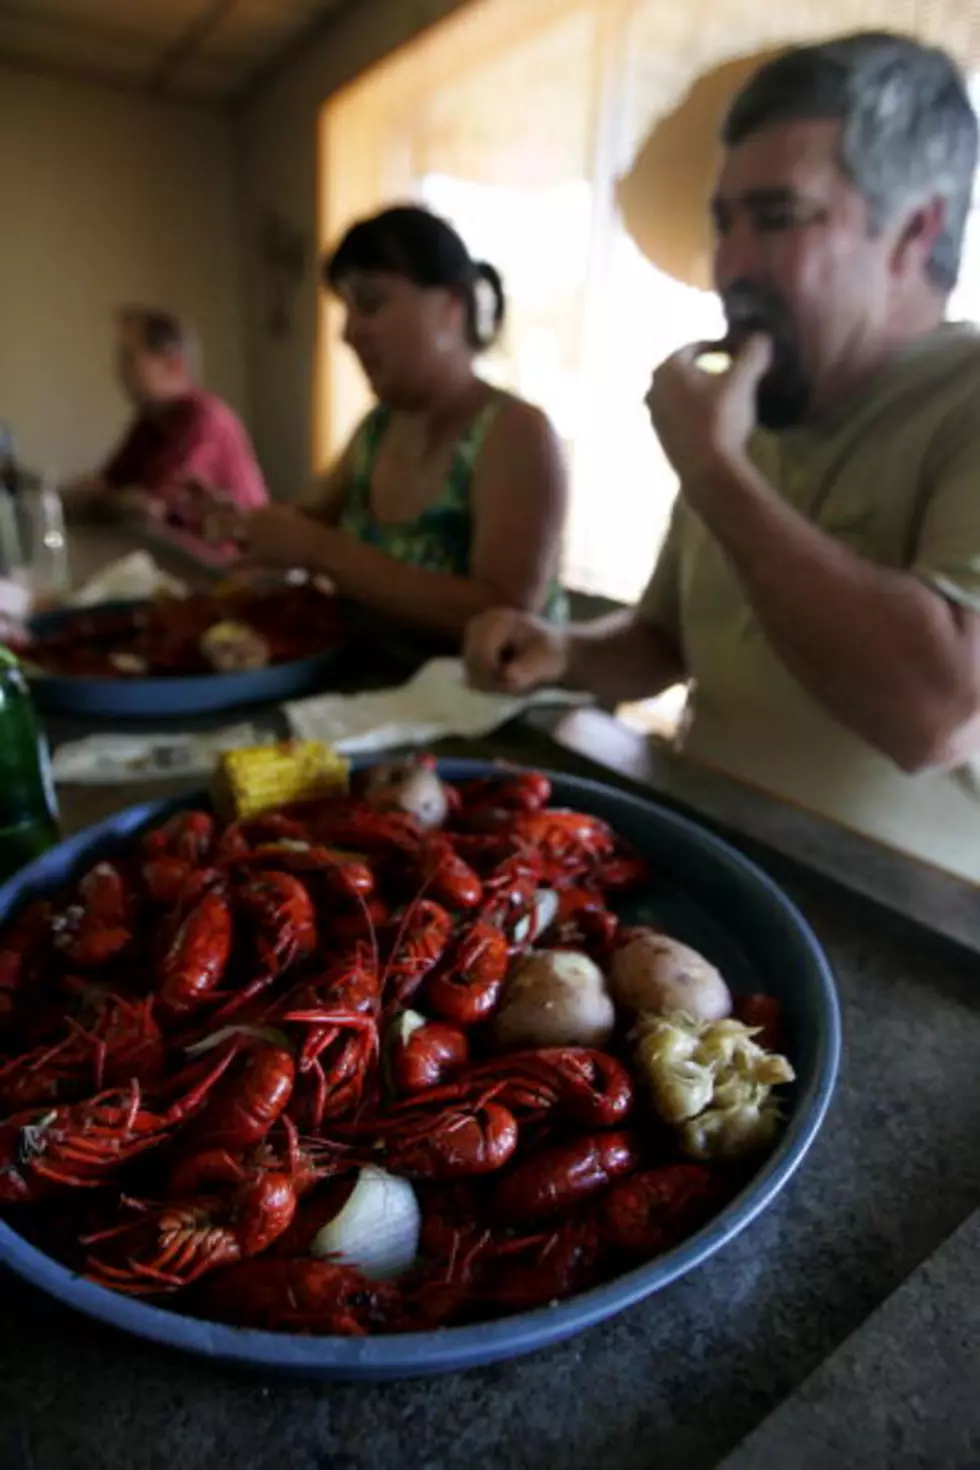 Video Shows Just How To Eat a Crawfish